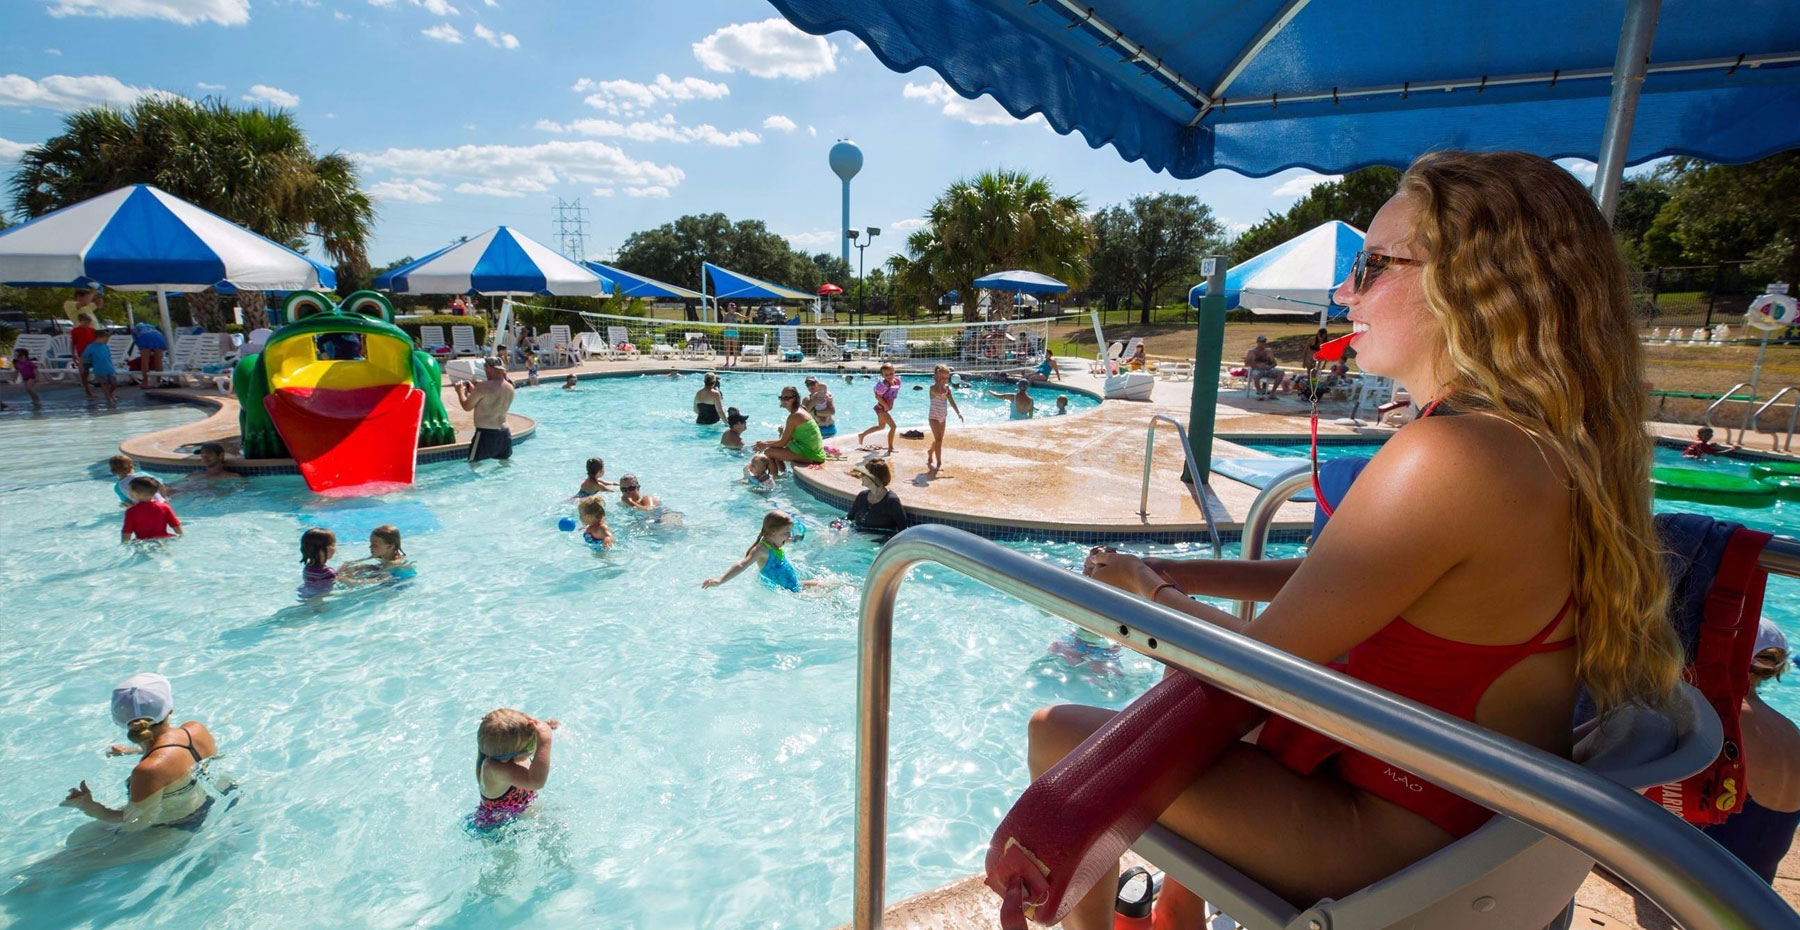 Community waterpark in Lakeway TX with residents enjoying the water and amenities.